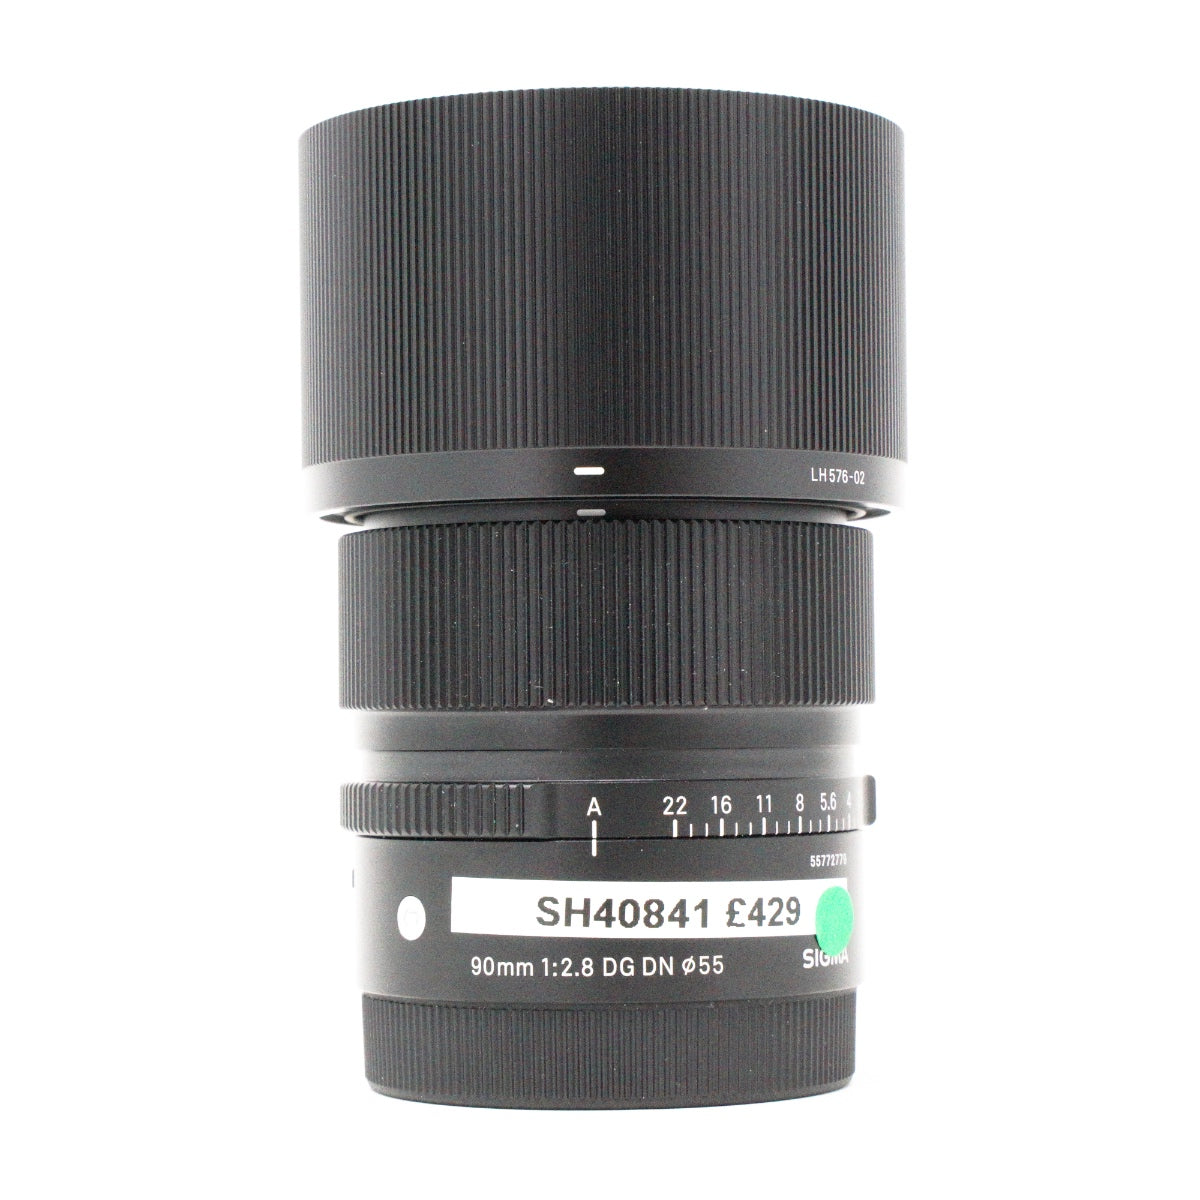 Used Sigma 90mm F2.8 DG DN Macro contemporary lens for Sony E-Mount 